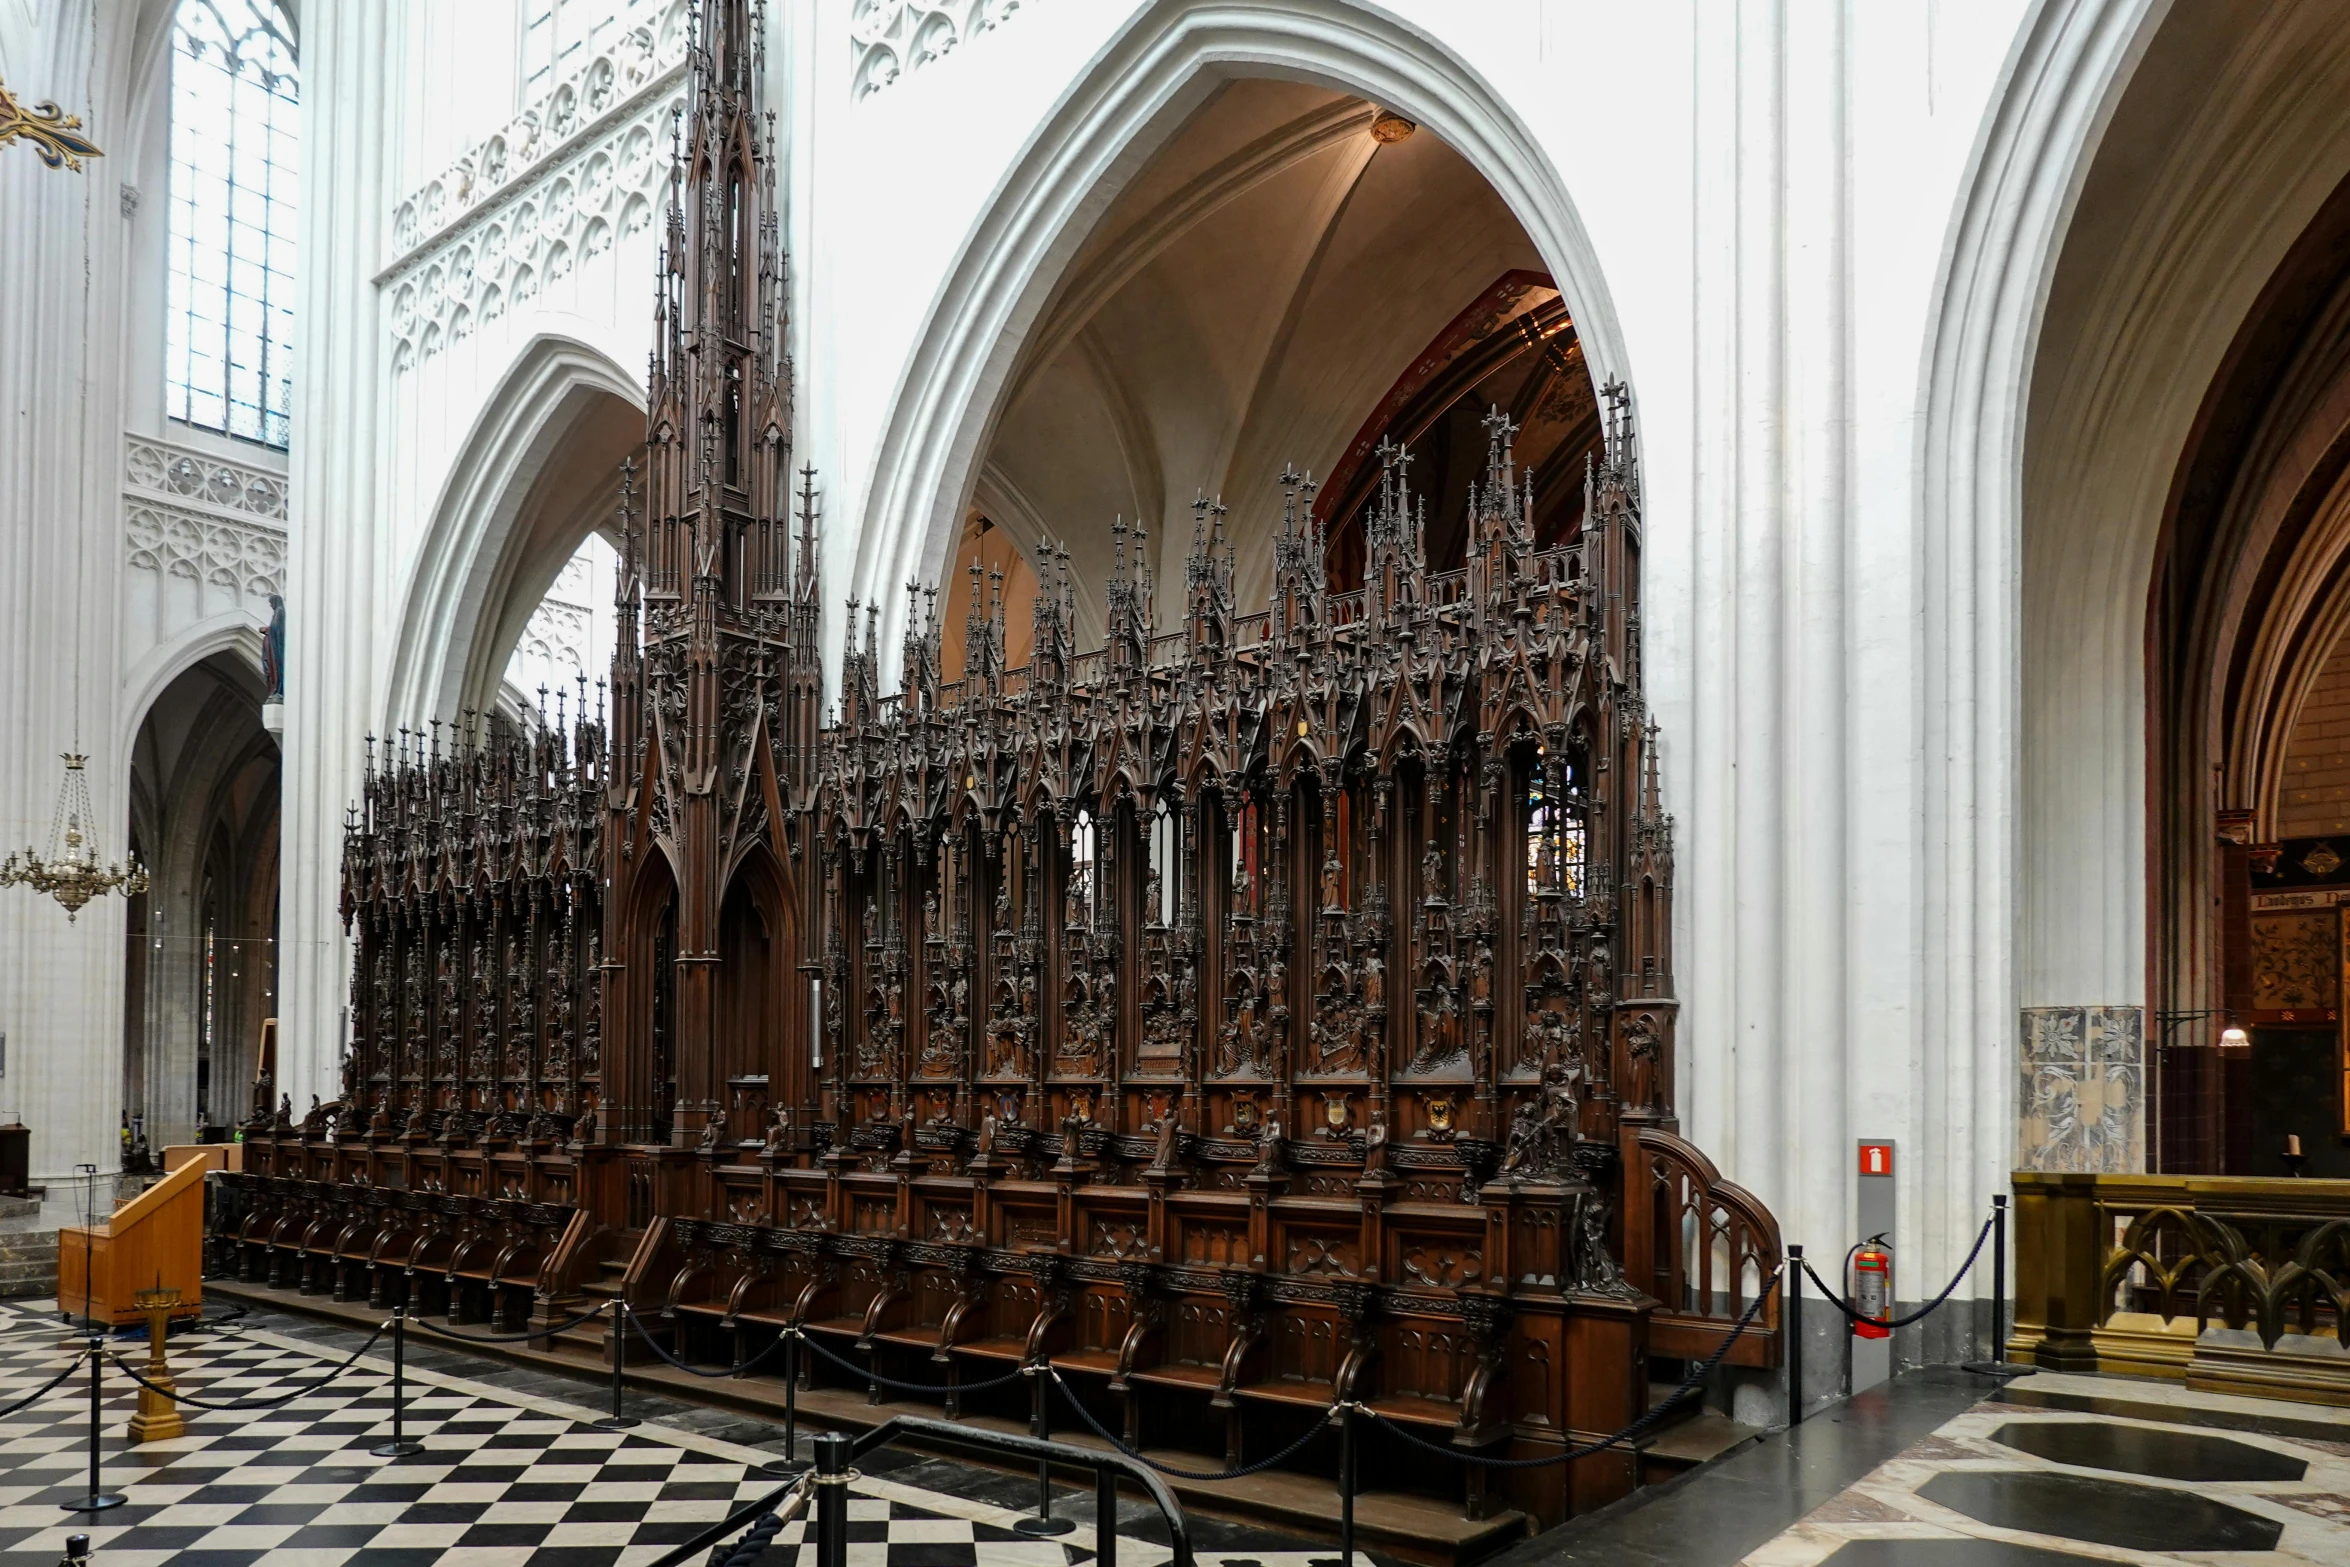 the elaborately designed wooden organ in a cathedral